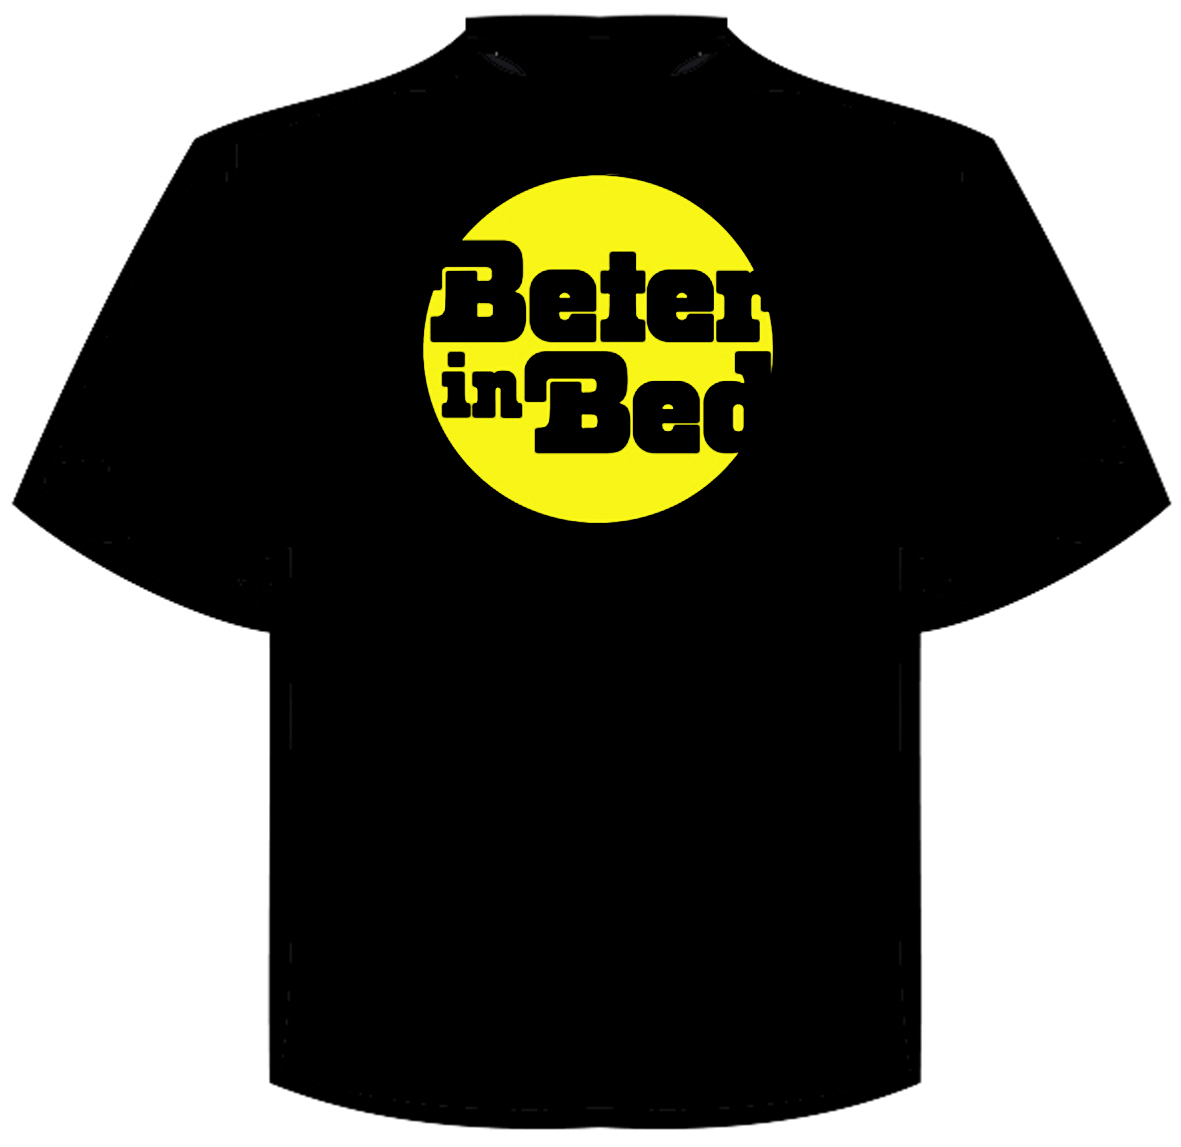 T-Shirt "beter in bed"